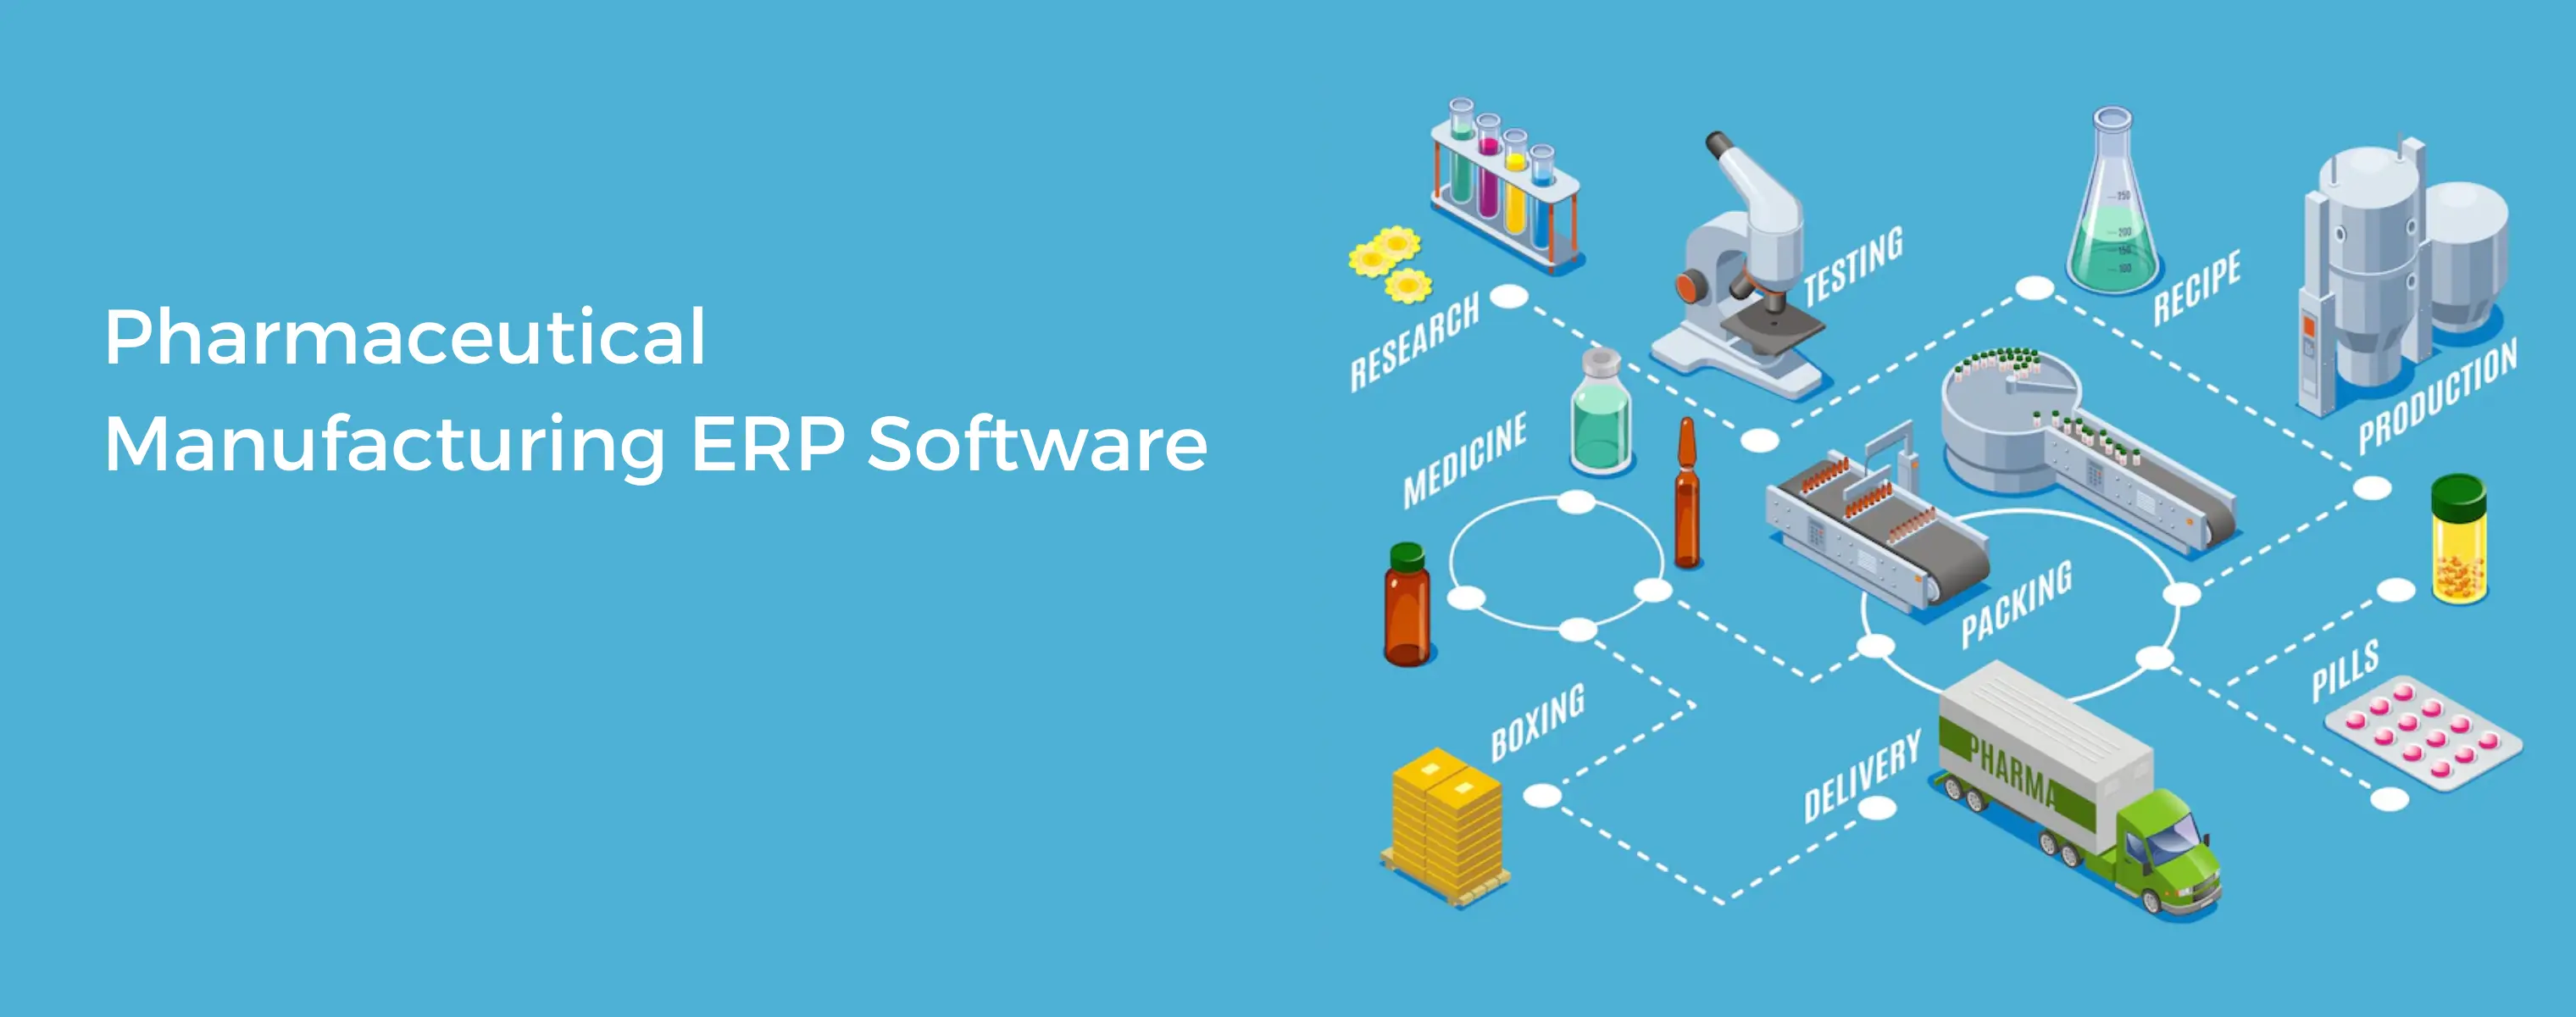 Pharmaceutical-Manufacturing-ERP-Software